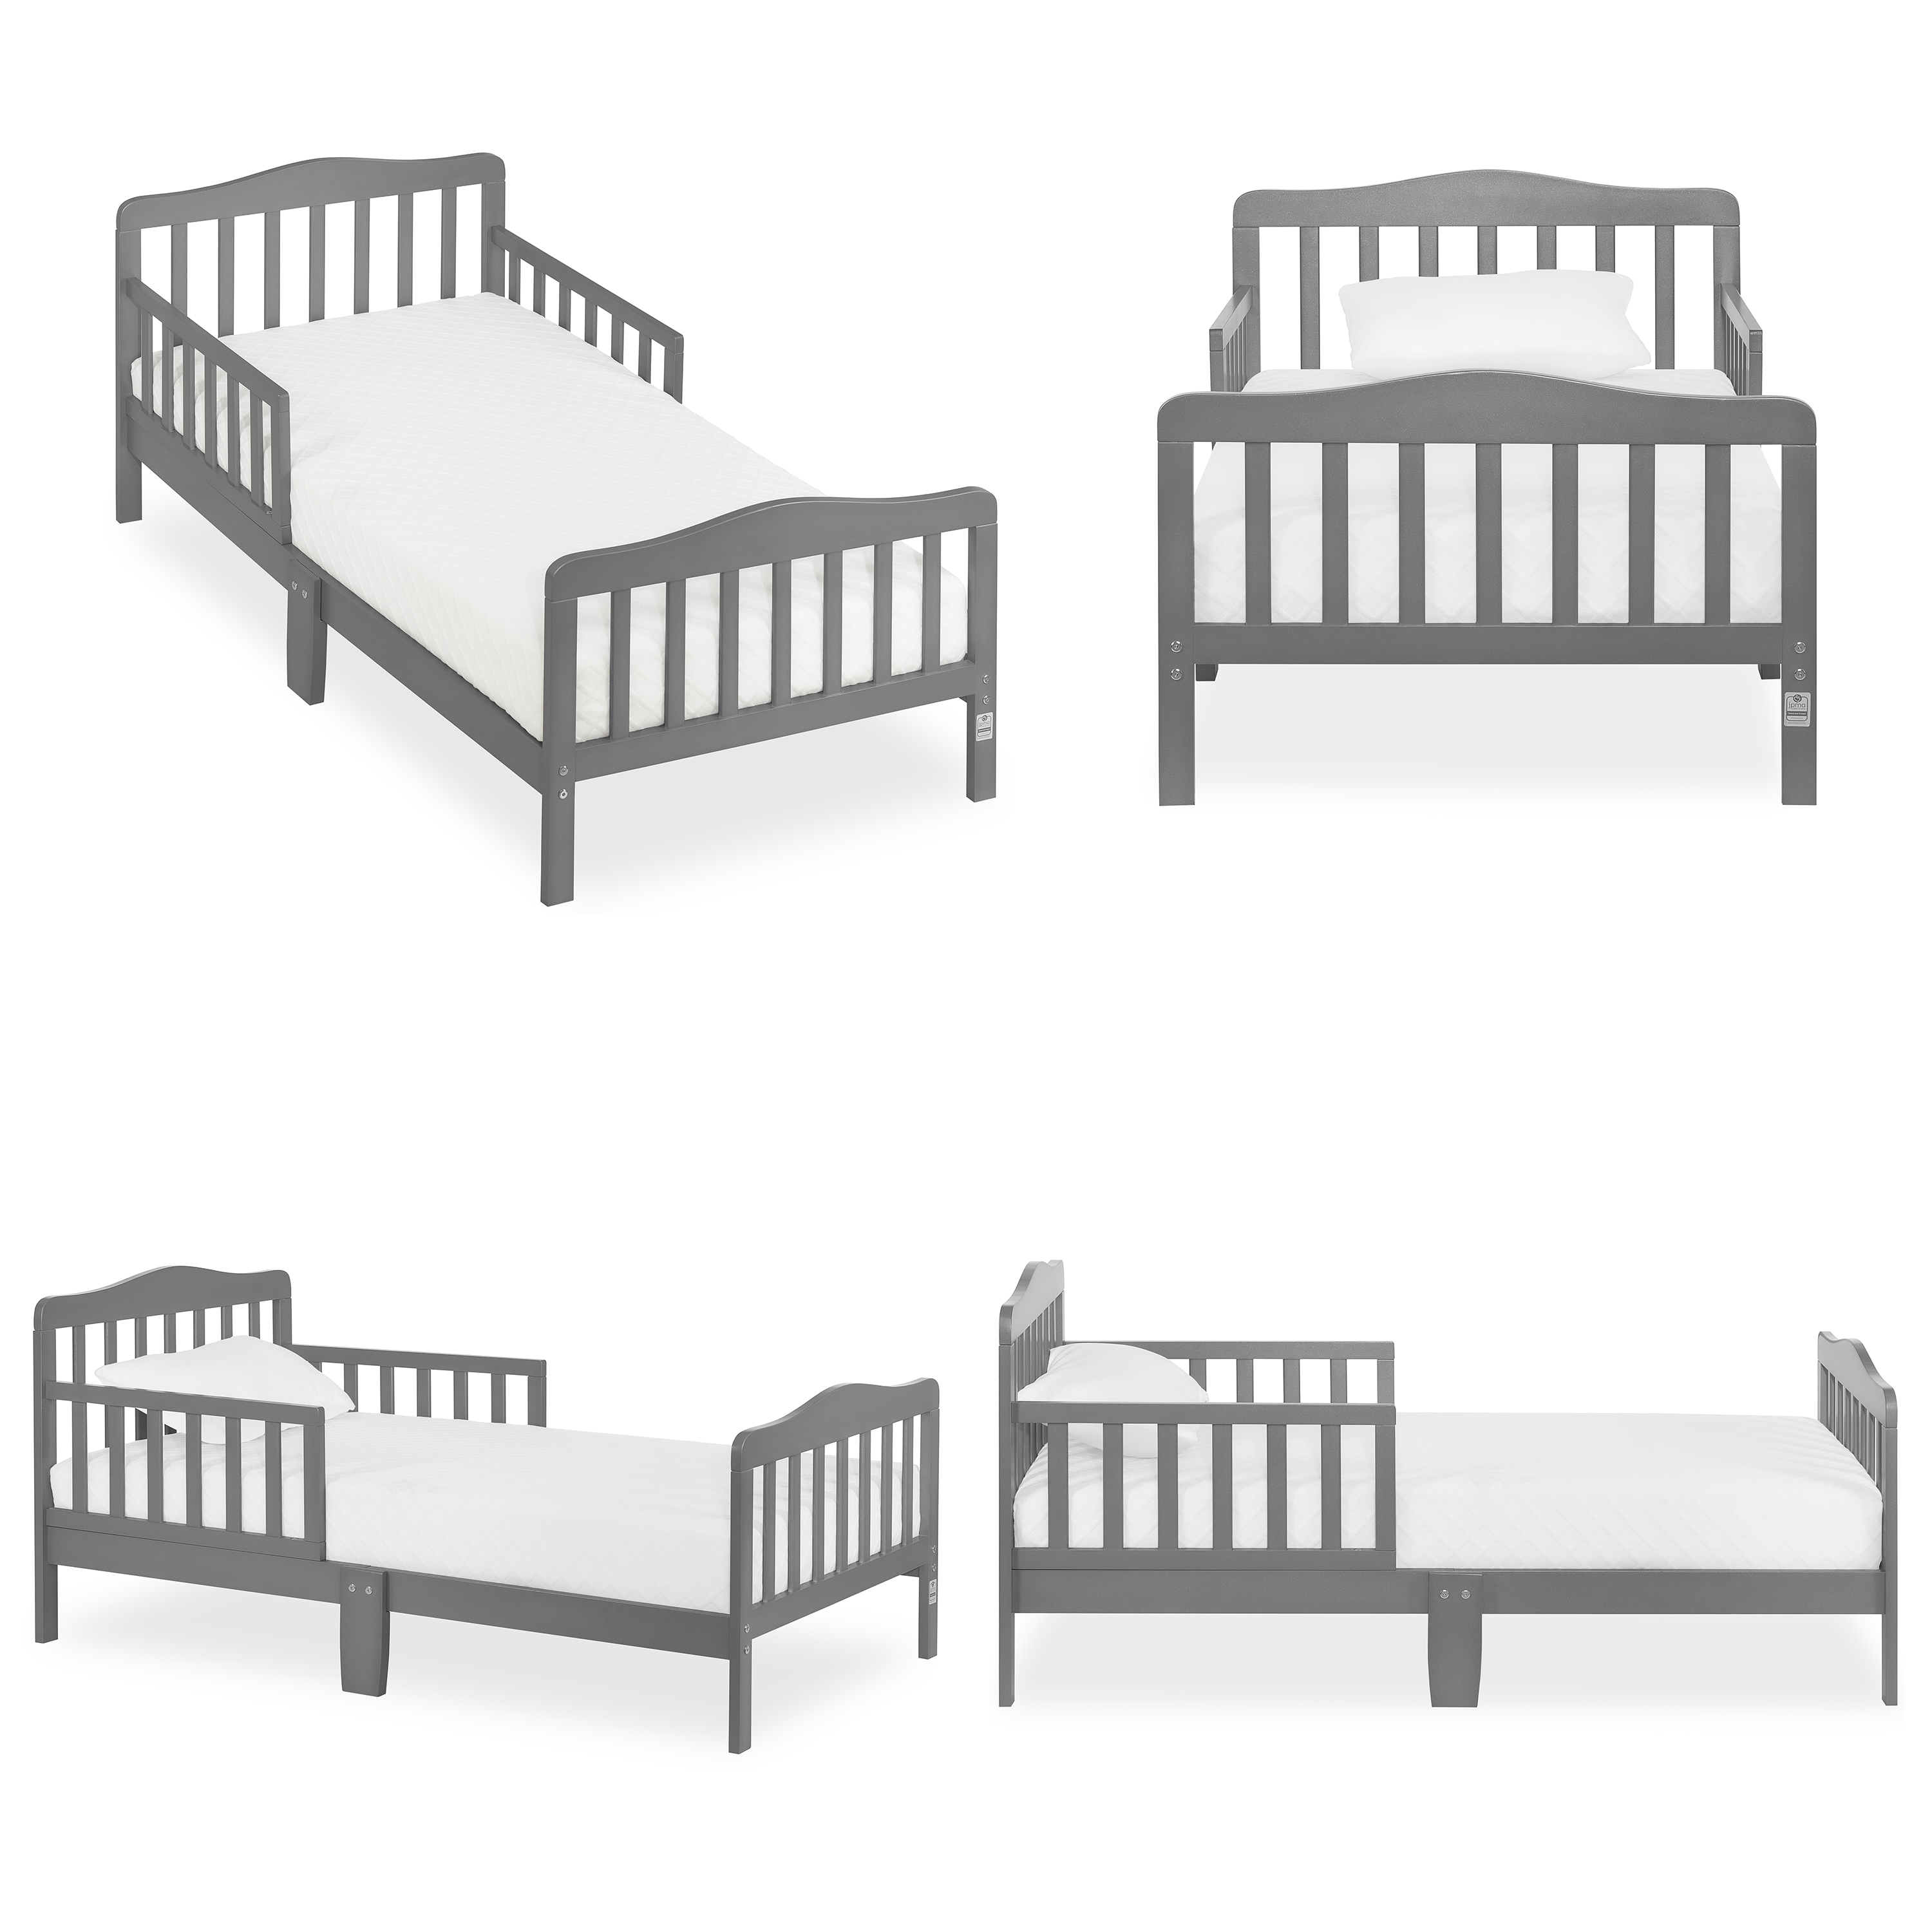 Dream On Me Classic Design Toddler Bed, Steel Grey - image 5 of 15